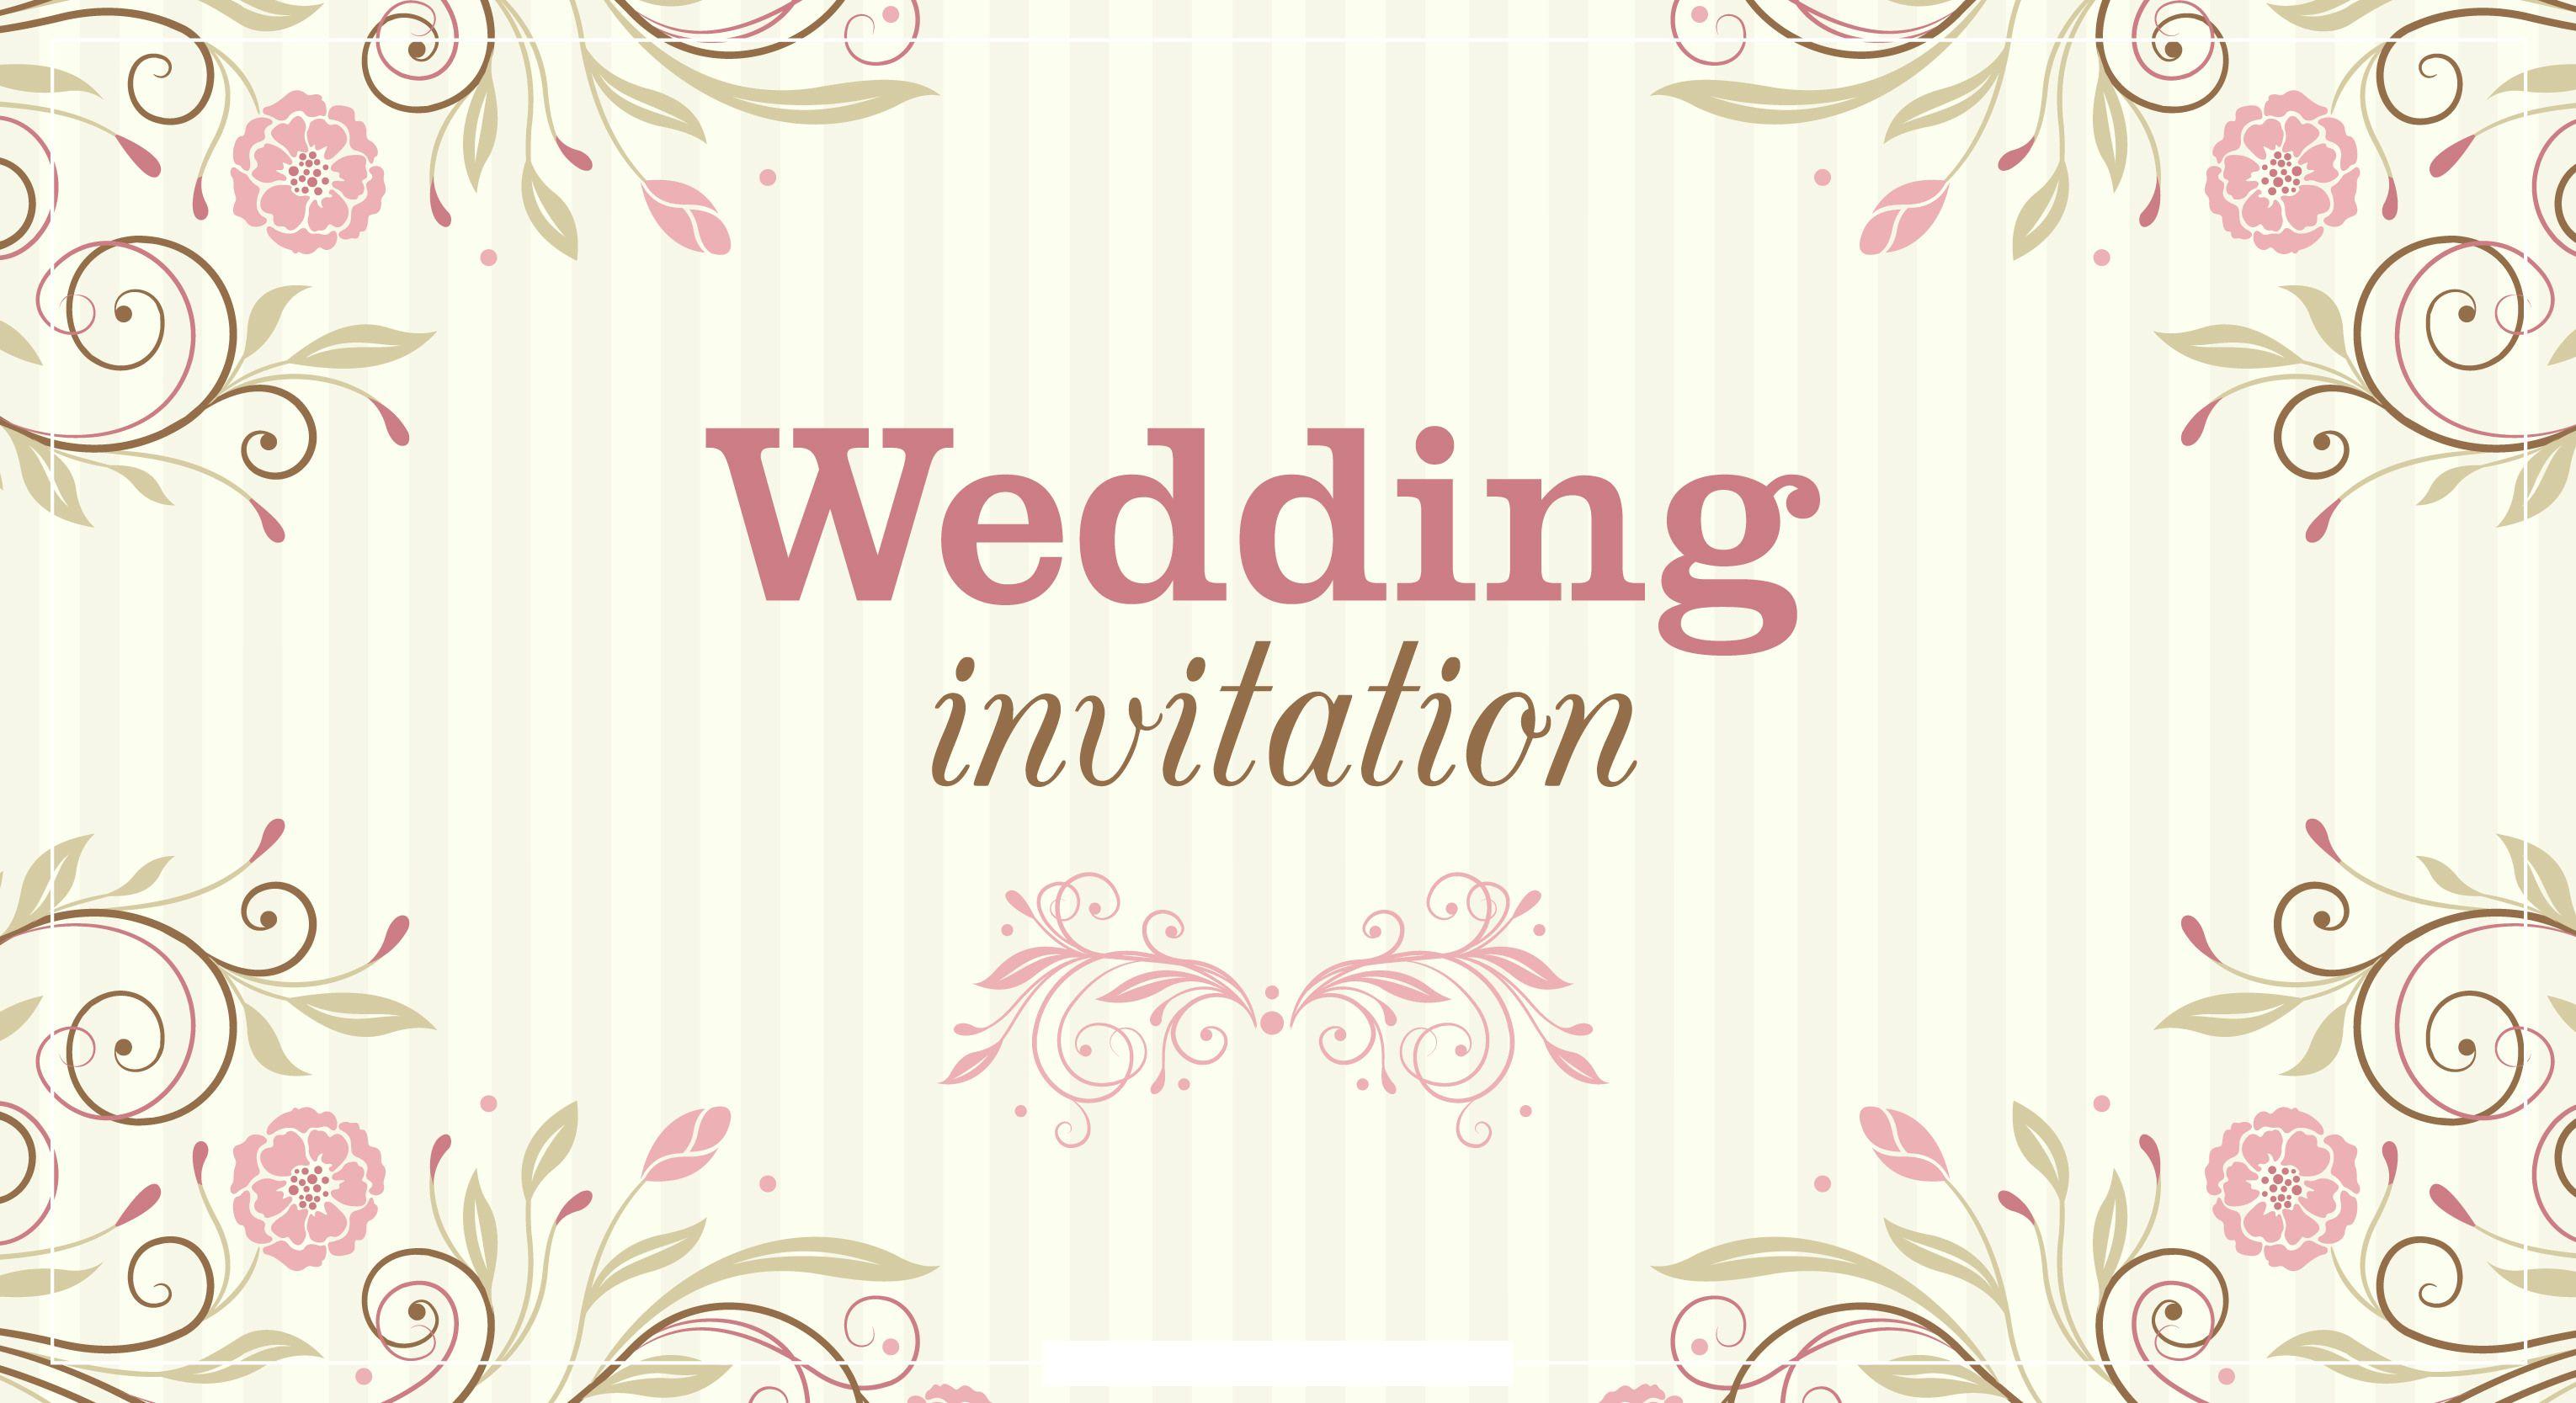 Background Picture For Wedding Invitations Best Of Vintage Wedding